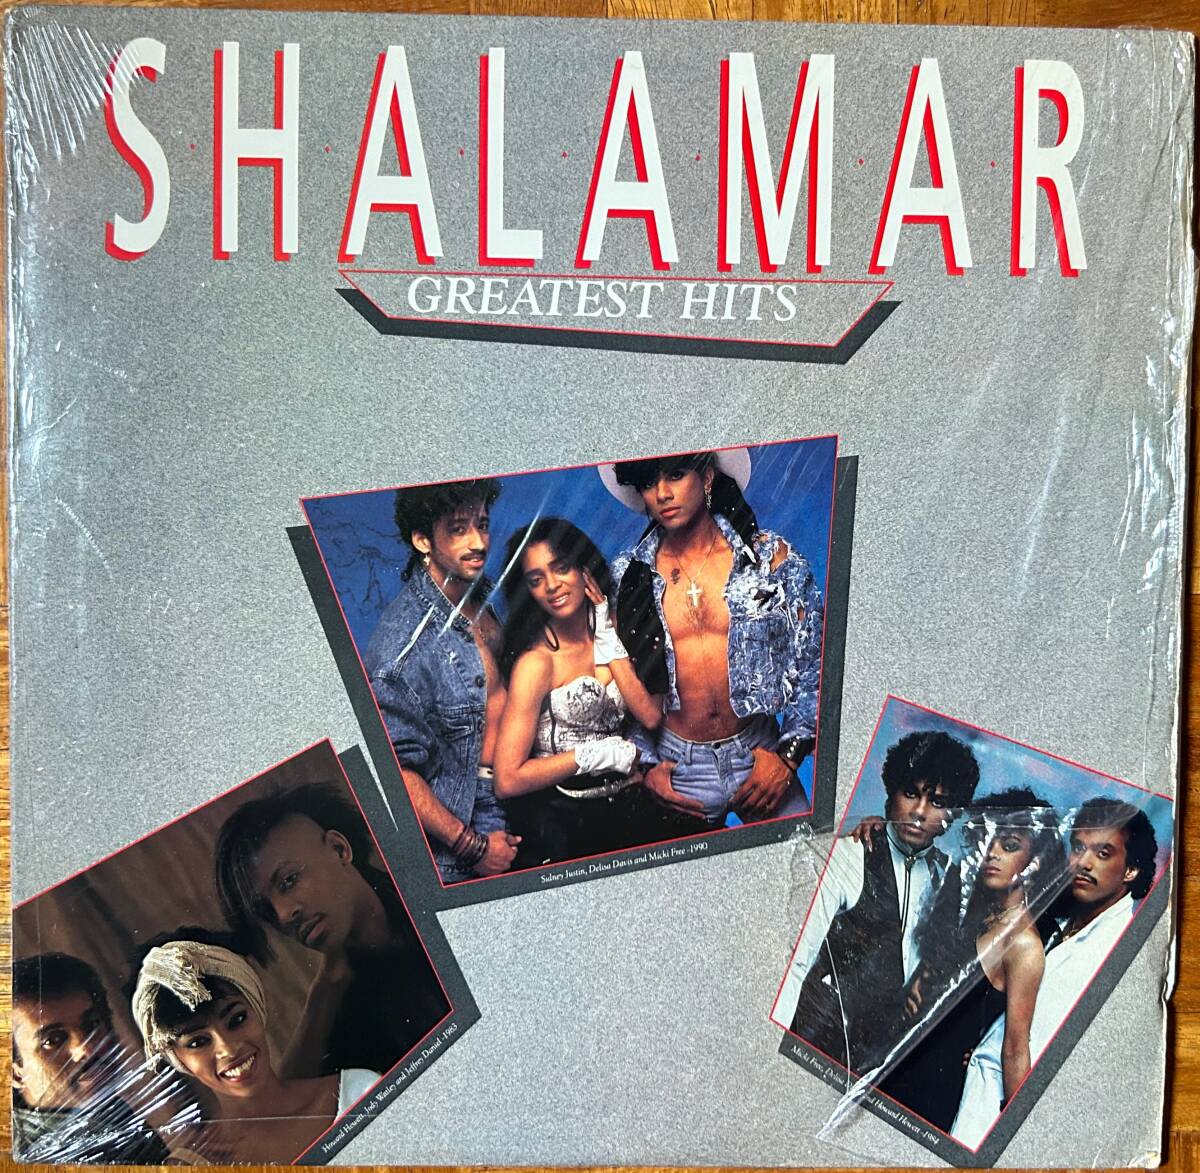 US盤LP★Shalamar★GREATEST HITS★89年★This Is For The Lover In You・A Night To Remember★超音波洗浄済★試聴可能_画像1